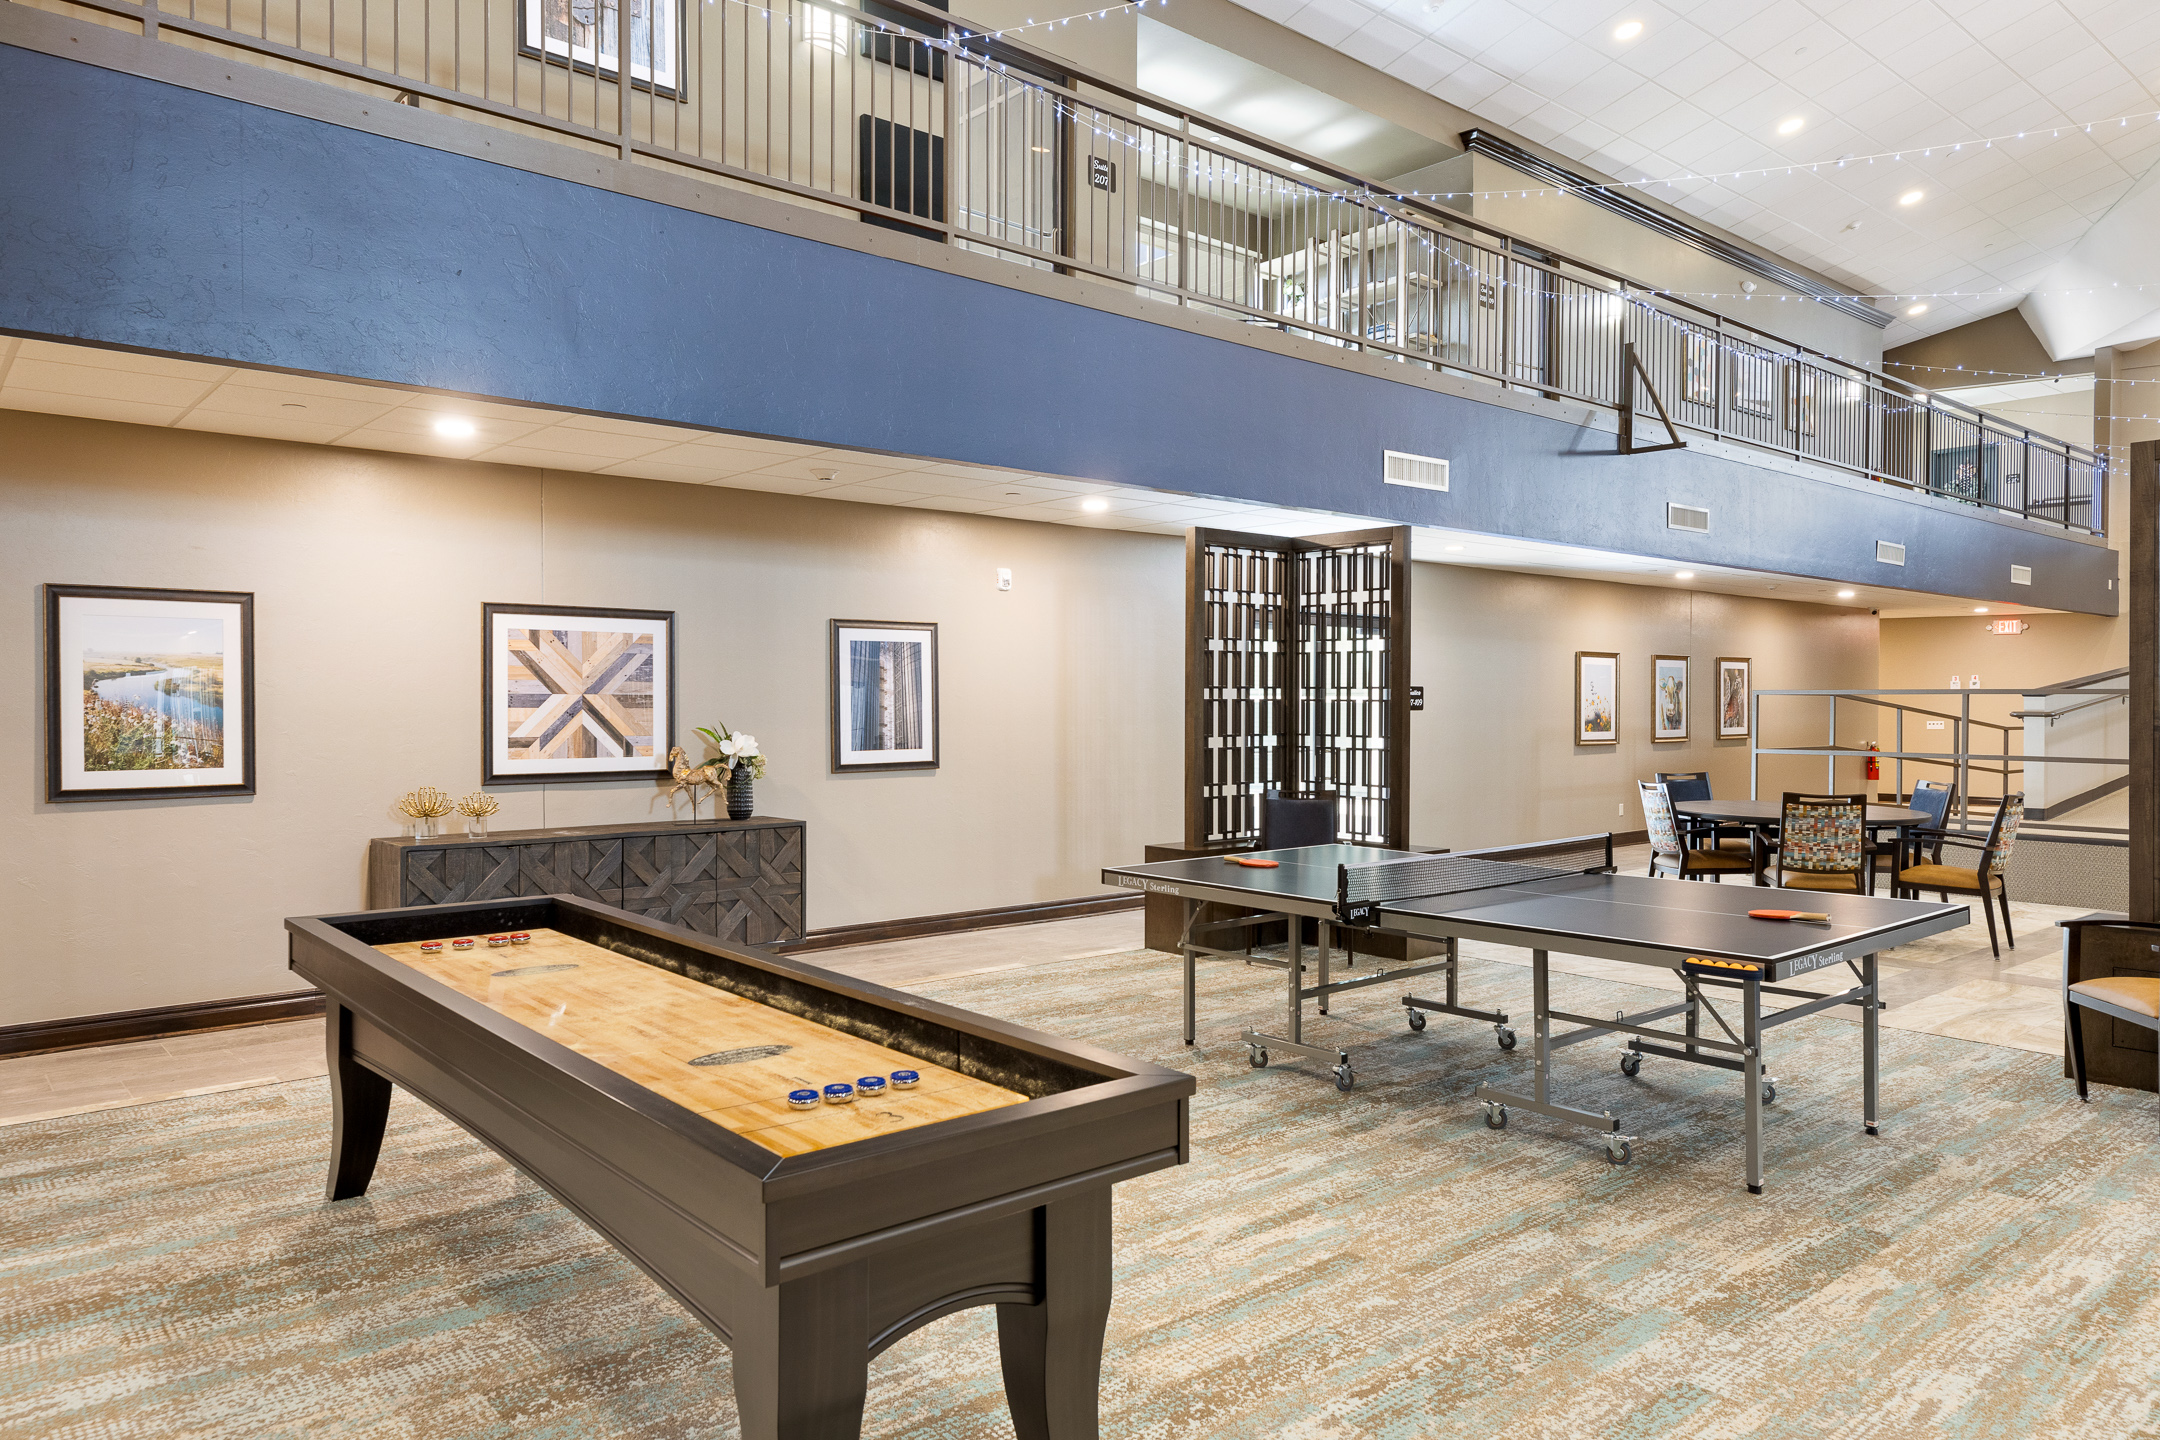 Game Room at Grace Pointe Senior Living Community in Oklahoma.